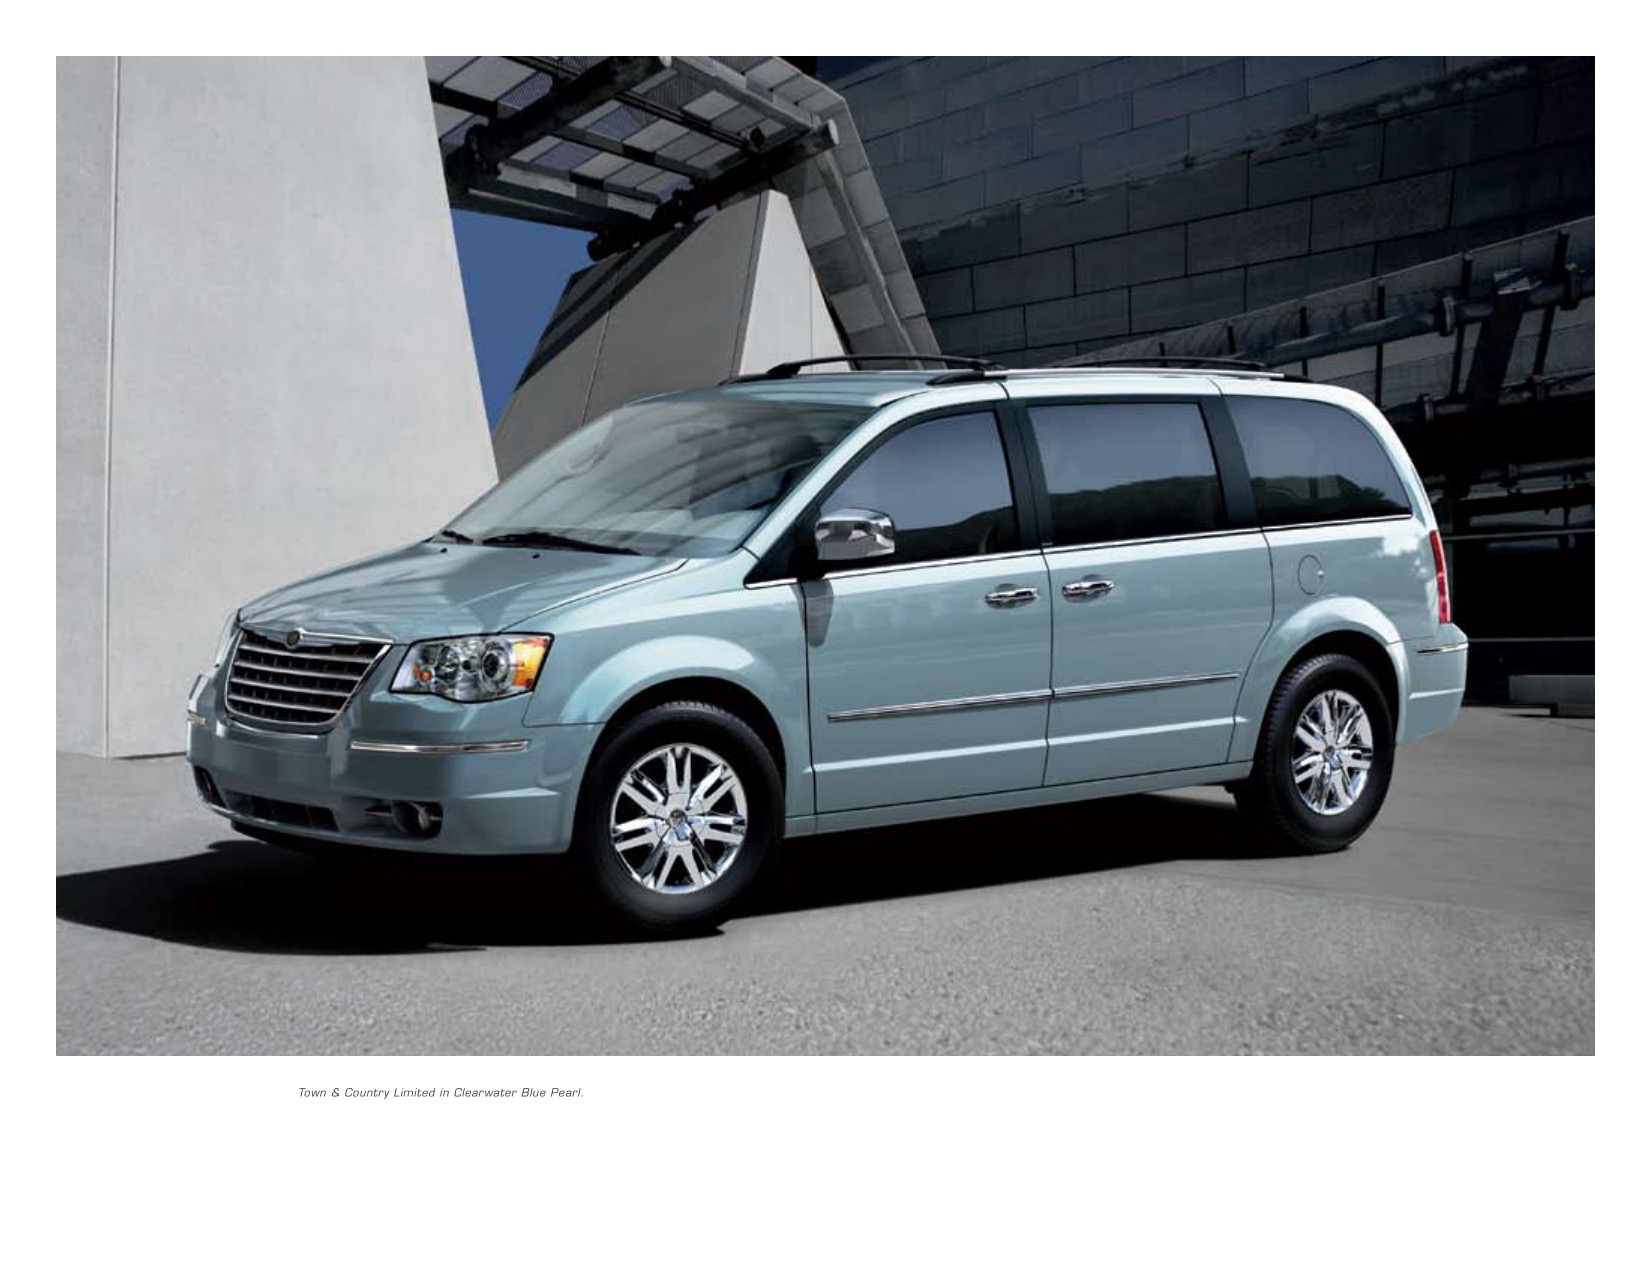 2009 Chrysler Town & Country Brochure Page 6